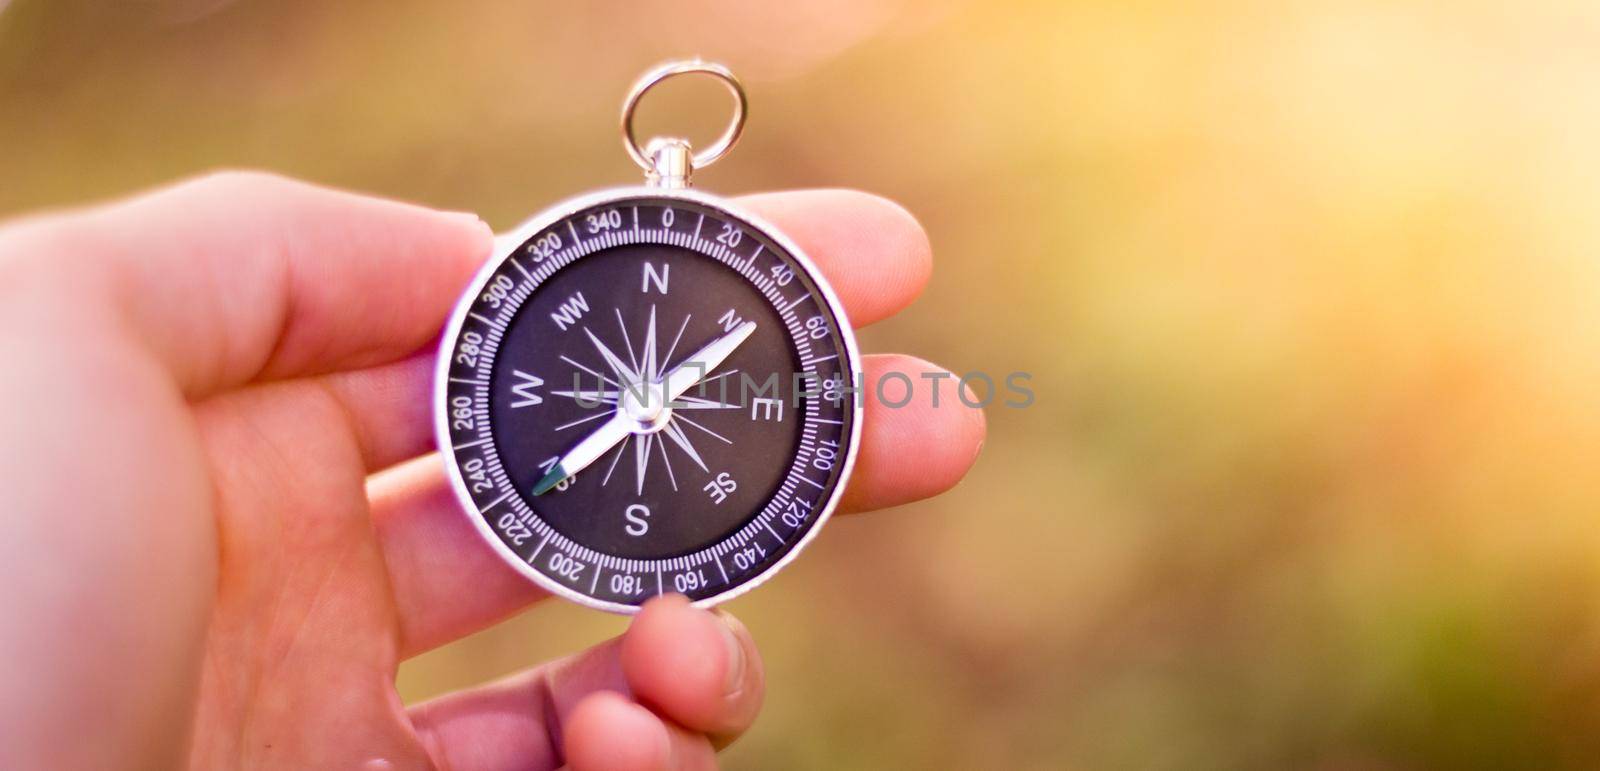 Adventure: Compass in man’s hand, showing the direction by Daxenbichler